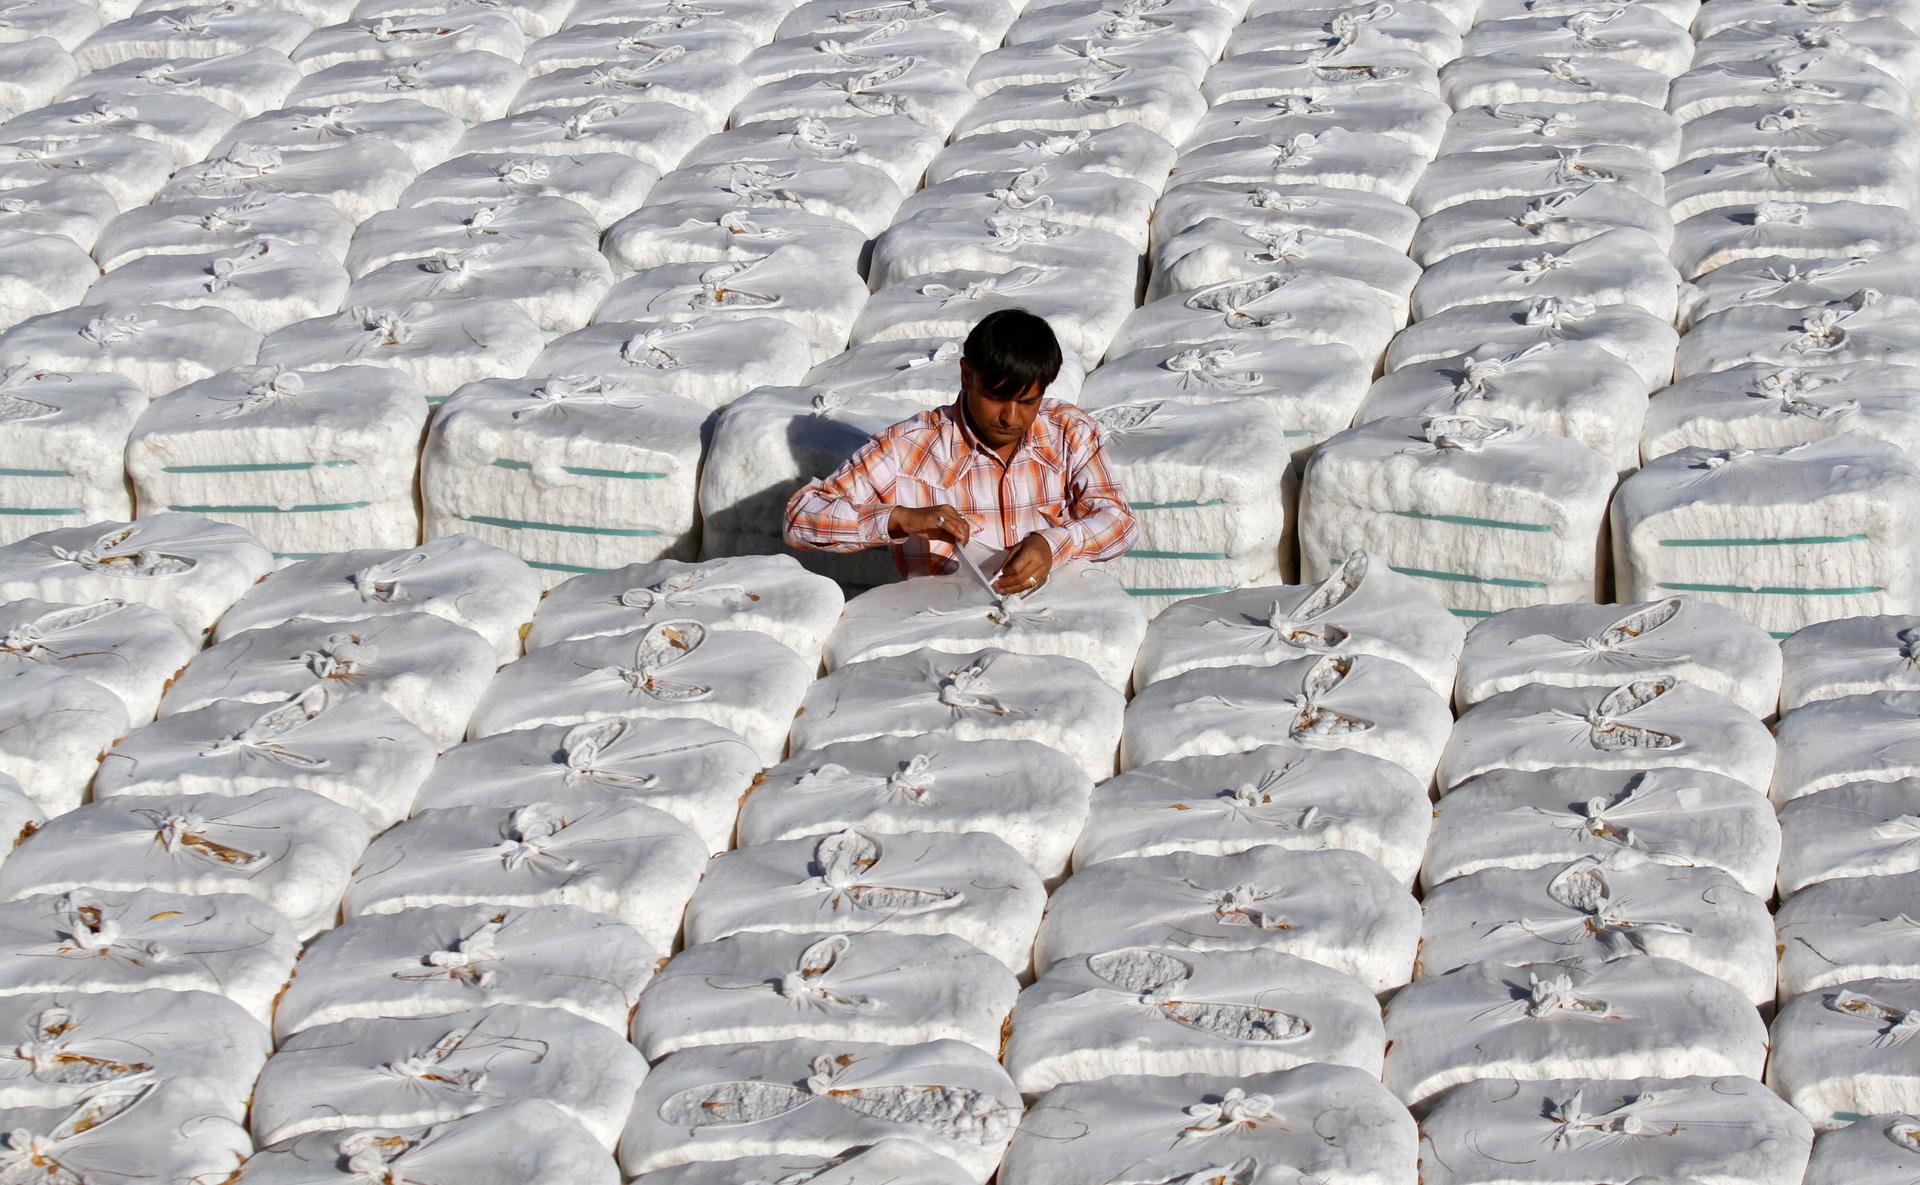 A trader checks stacked boxes of cotton before loading them onto a truck inside a cotton processing unit in Kadi near the western Indian city of Ahmedabad.